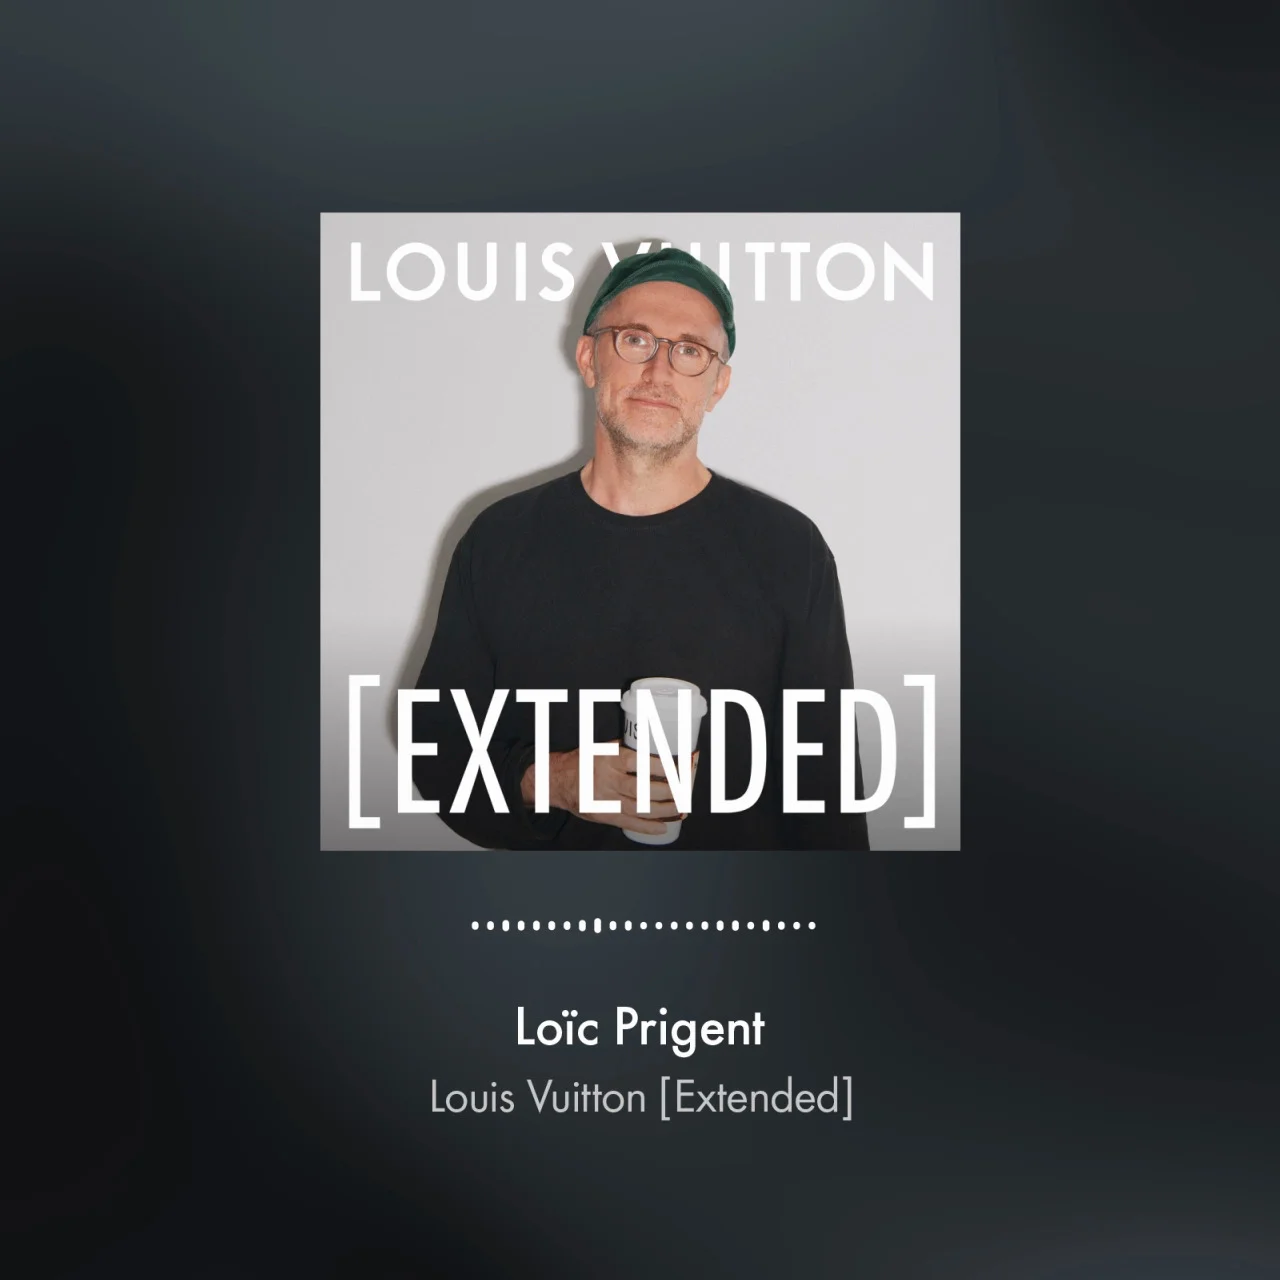 Louis Vuitton Has Launched a Podcast